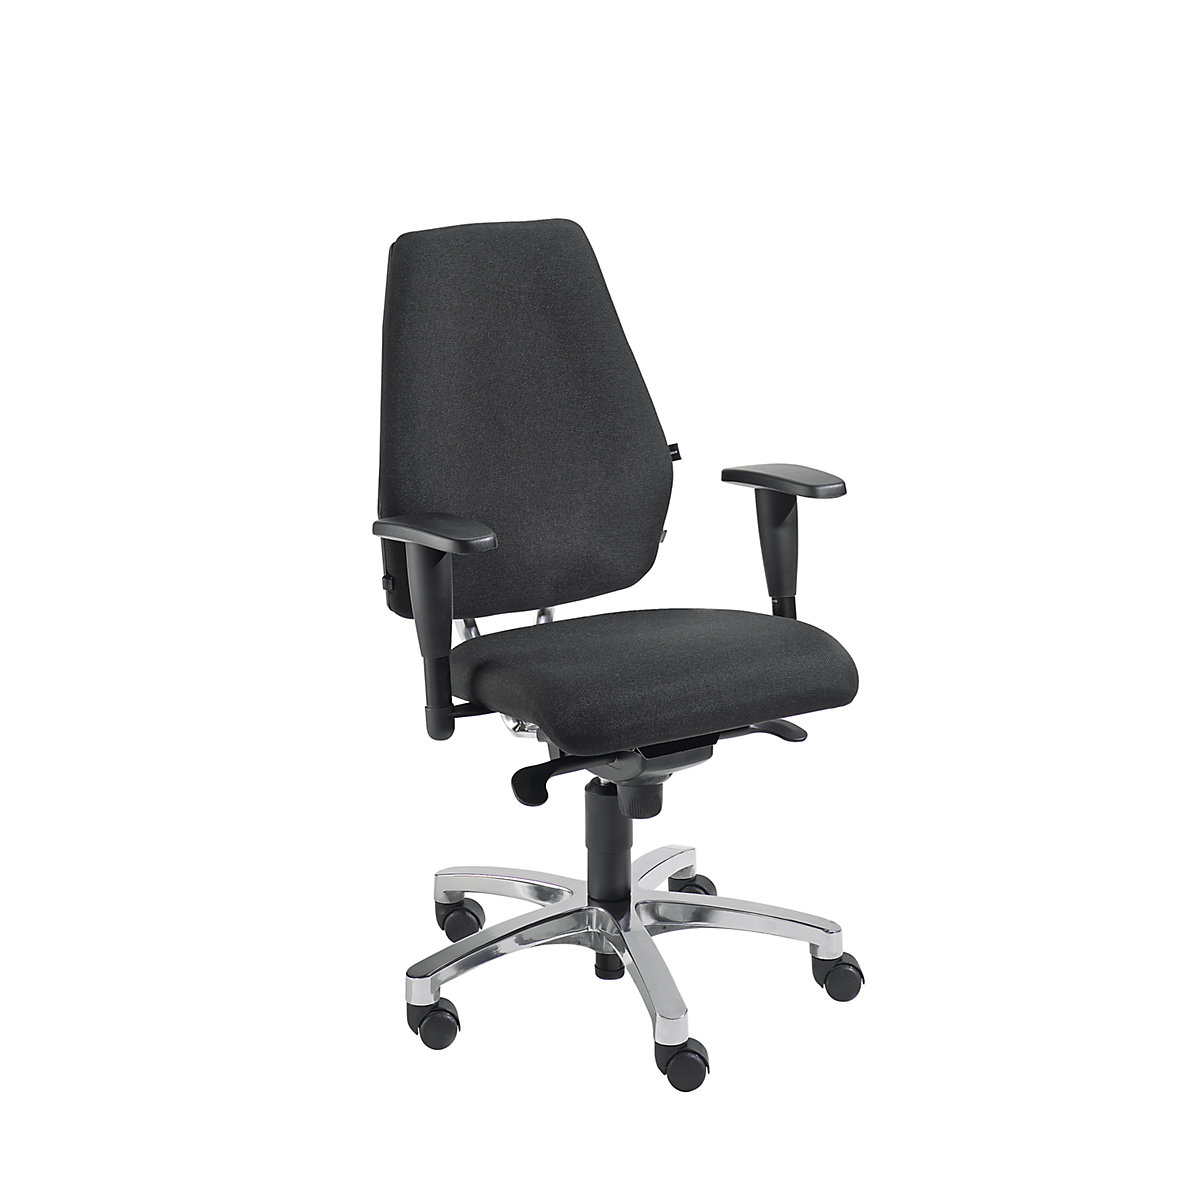 Operator swivel chair, point synchronous mechanism - Topstar